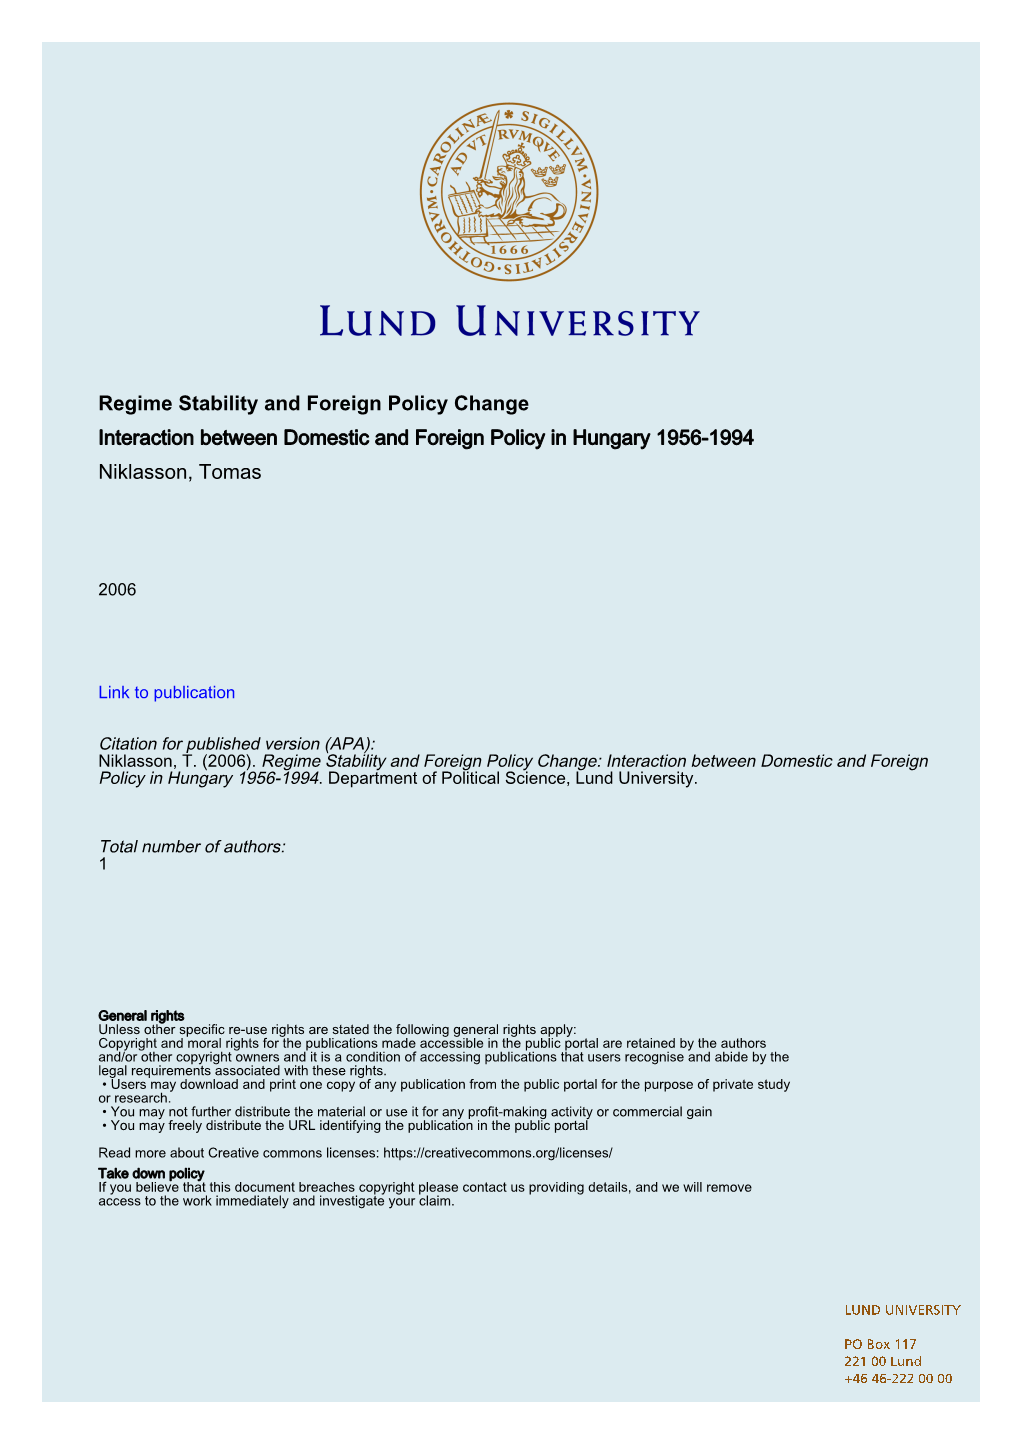 Regime Stability and Foreign Policy Change Interaction Between Domestic and Foreign Policy in Hungary 1956-1994 Niklasson, Tomas